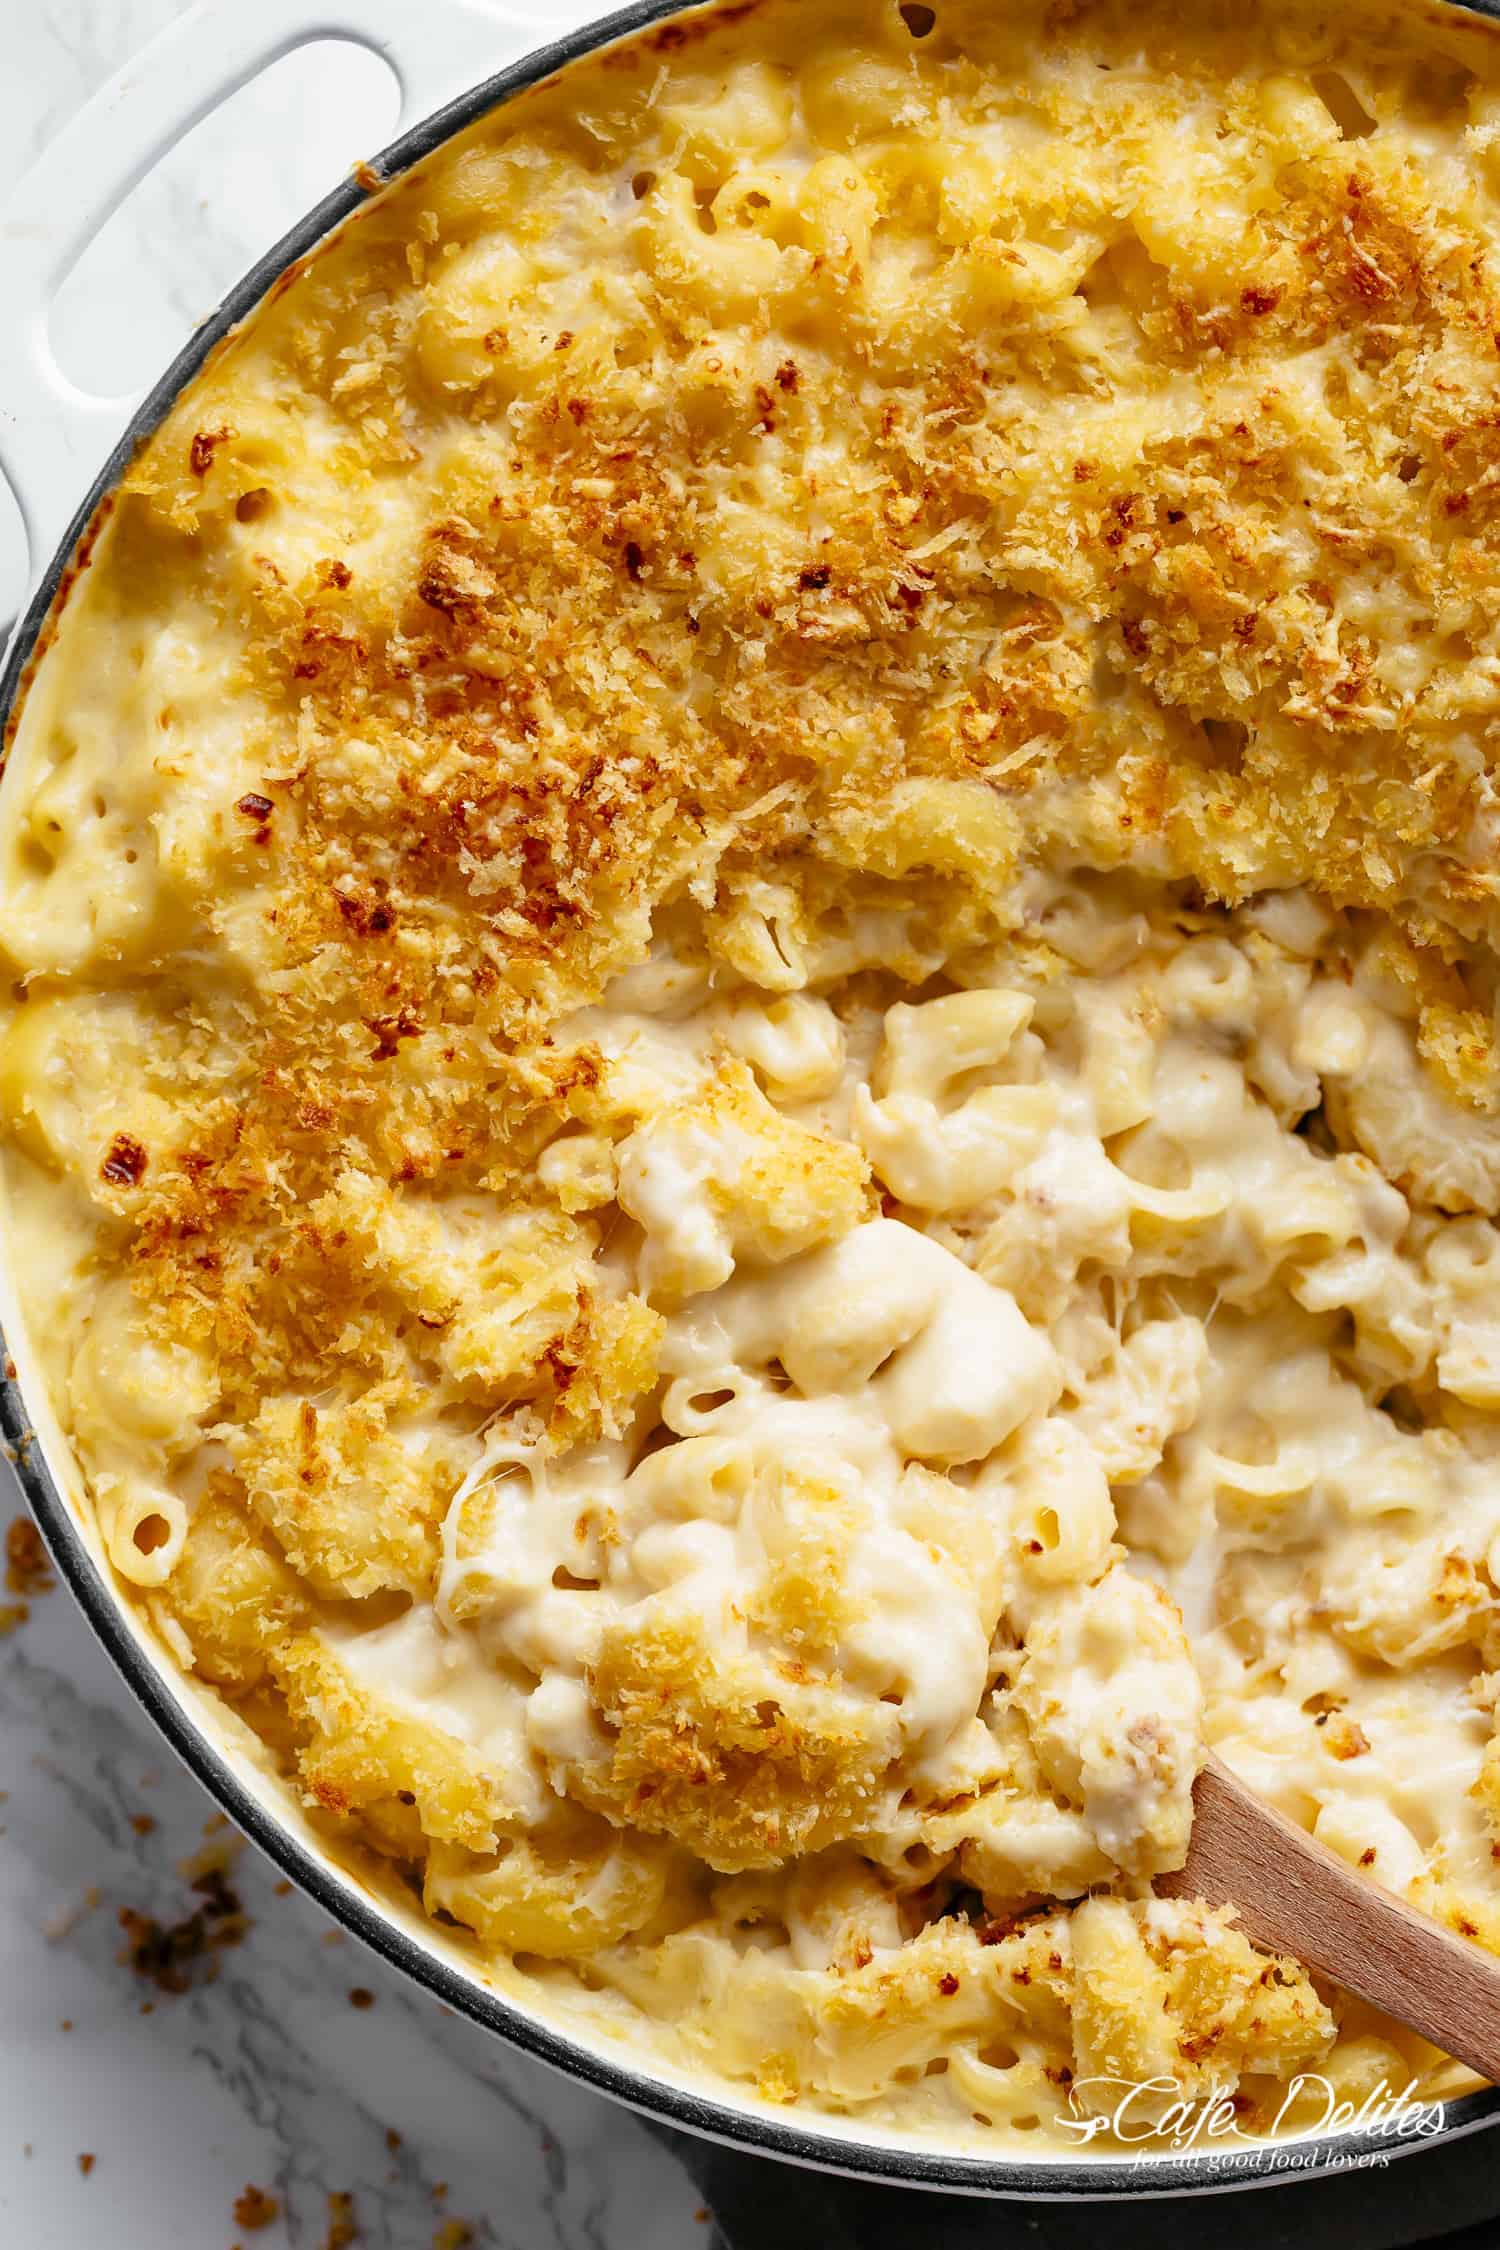 Casserole With Bread Crumb Topping: Deliciously Crunchy and Irresistible